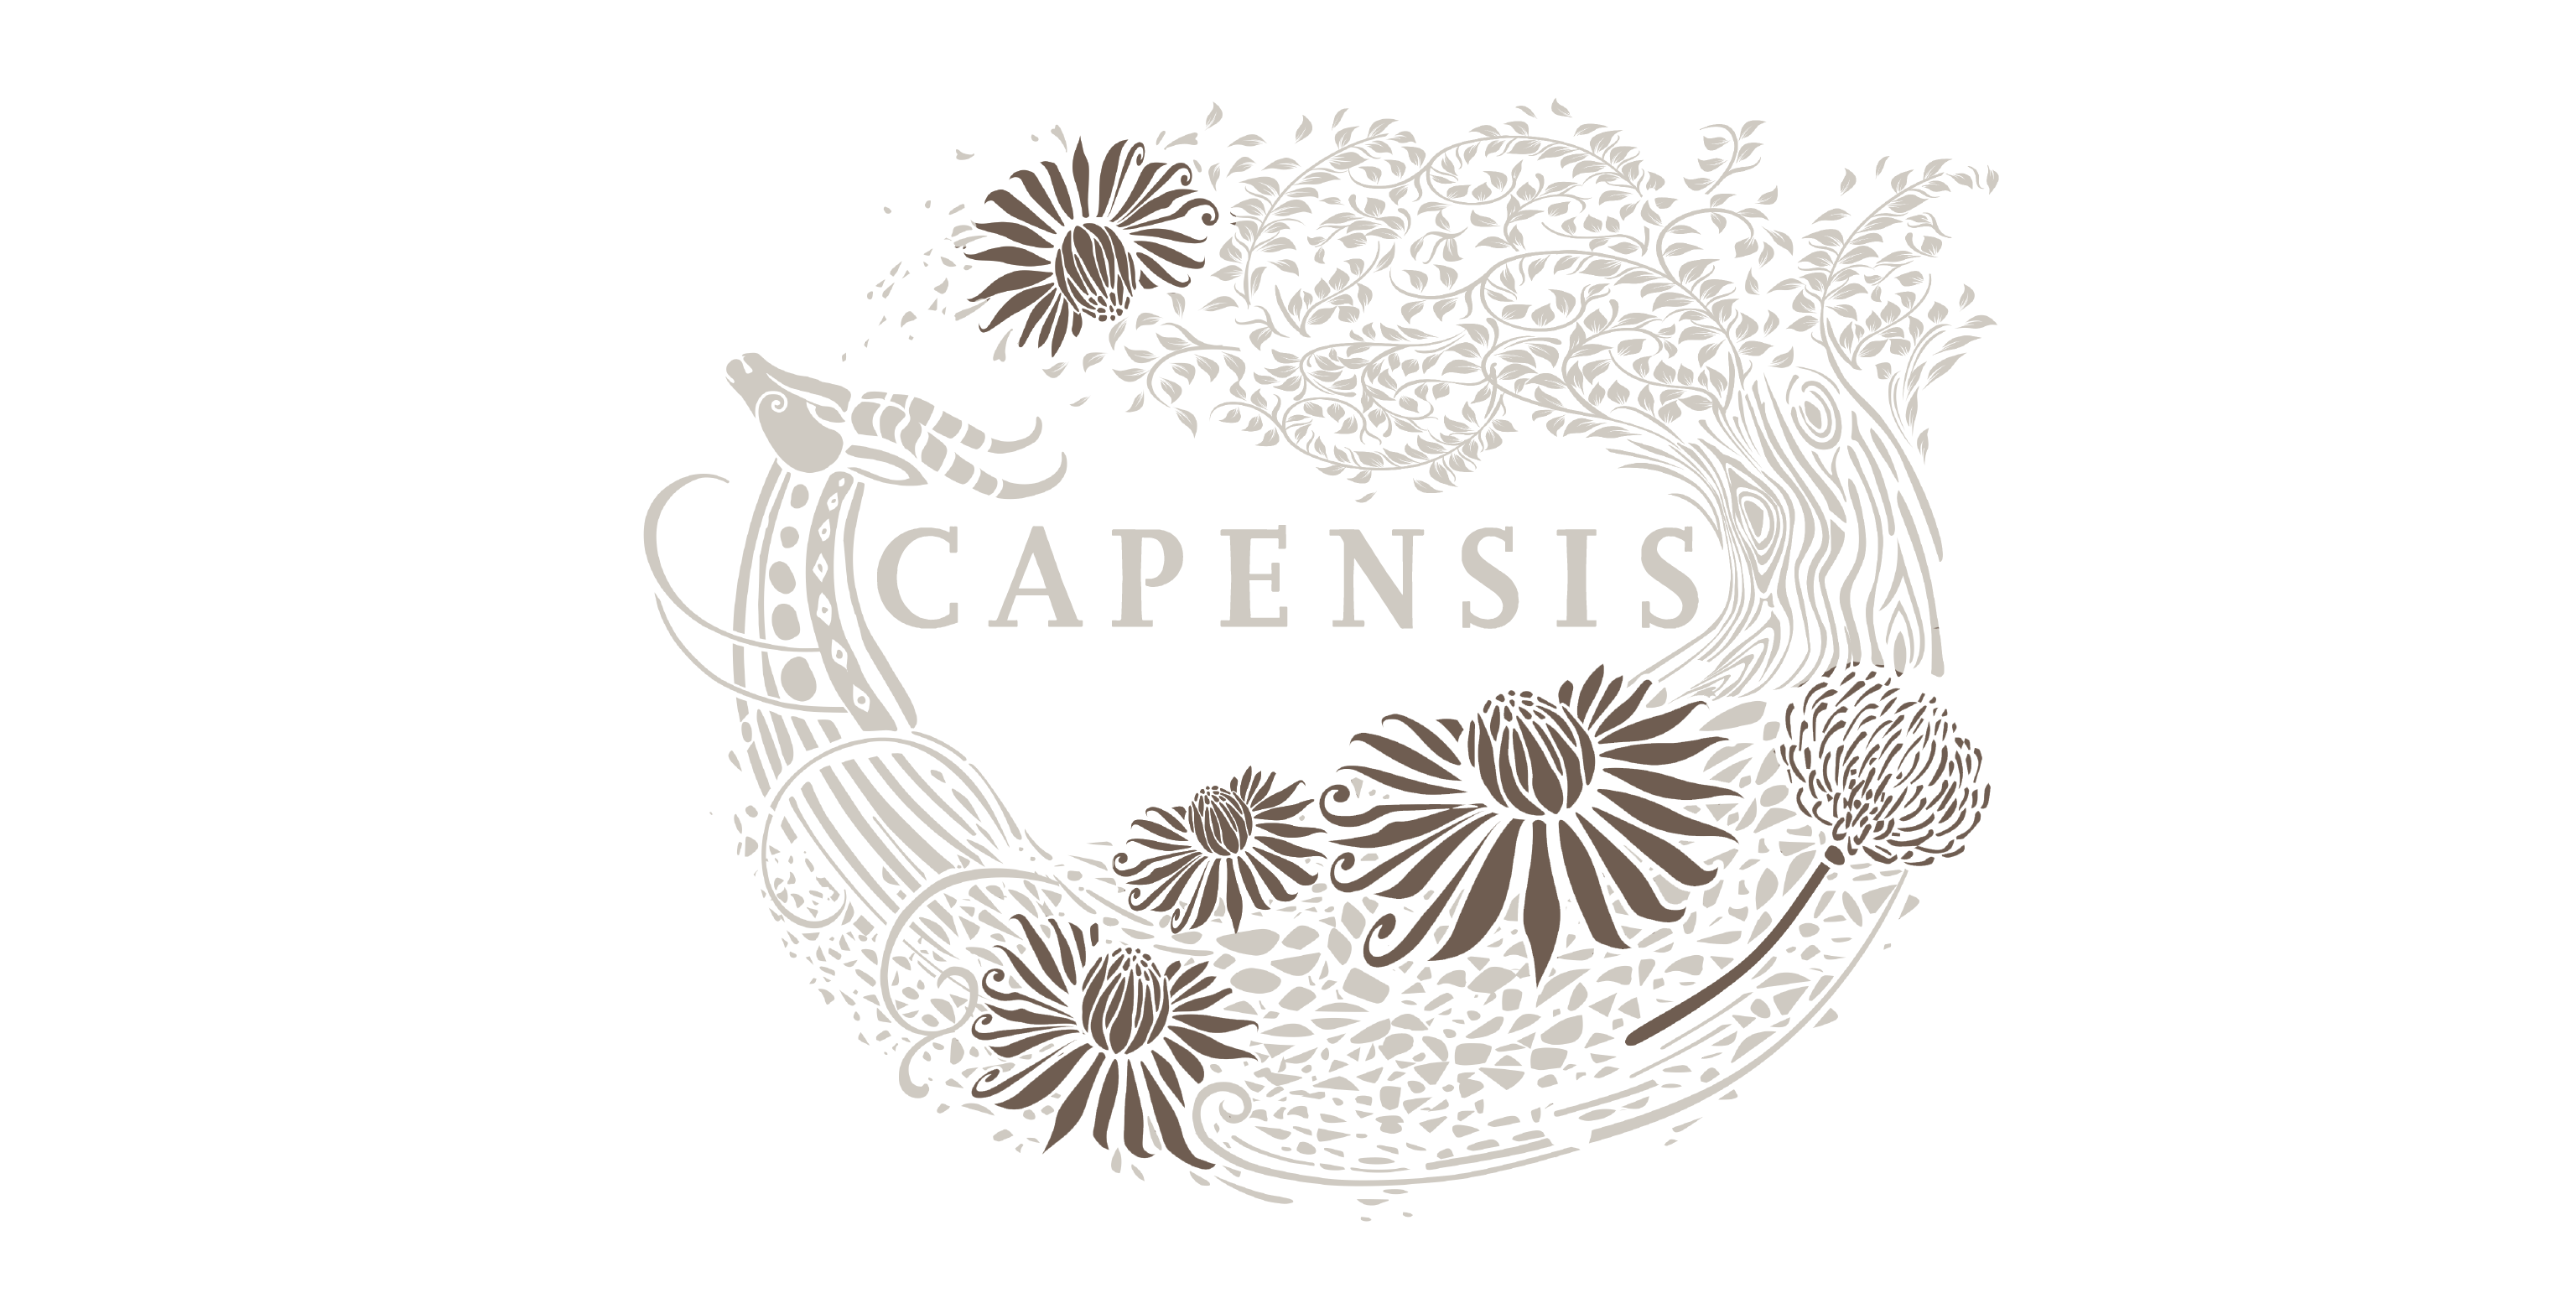 Capensis label with King Protea highlighted